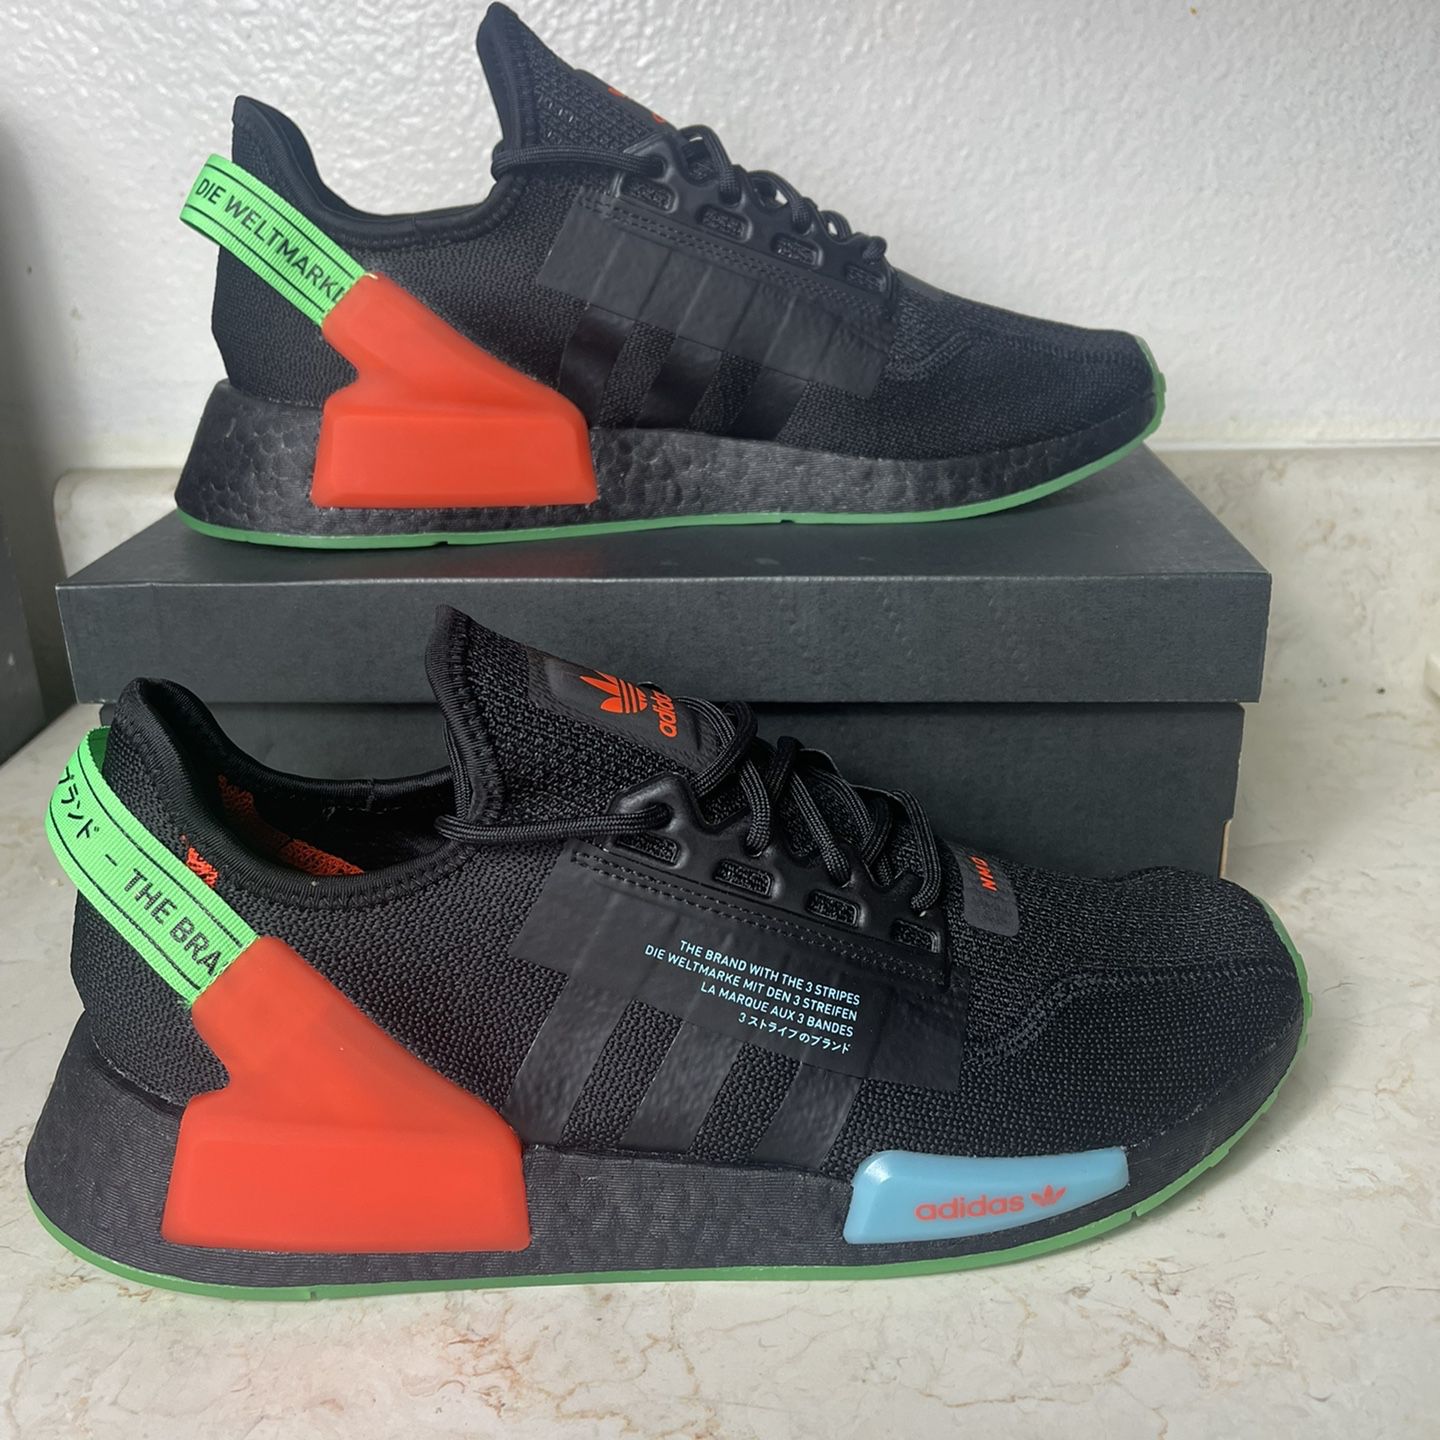 New Adidas R1.V2 Originals - Size 10.5 for Sale in OfferUp